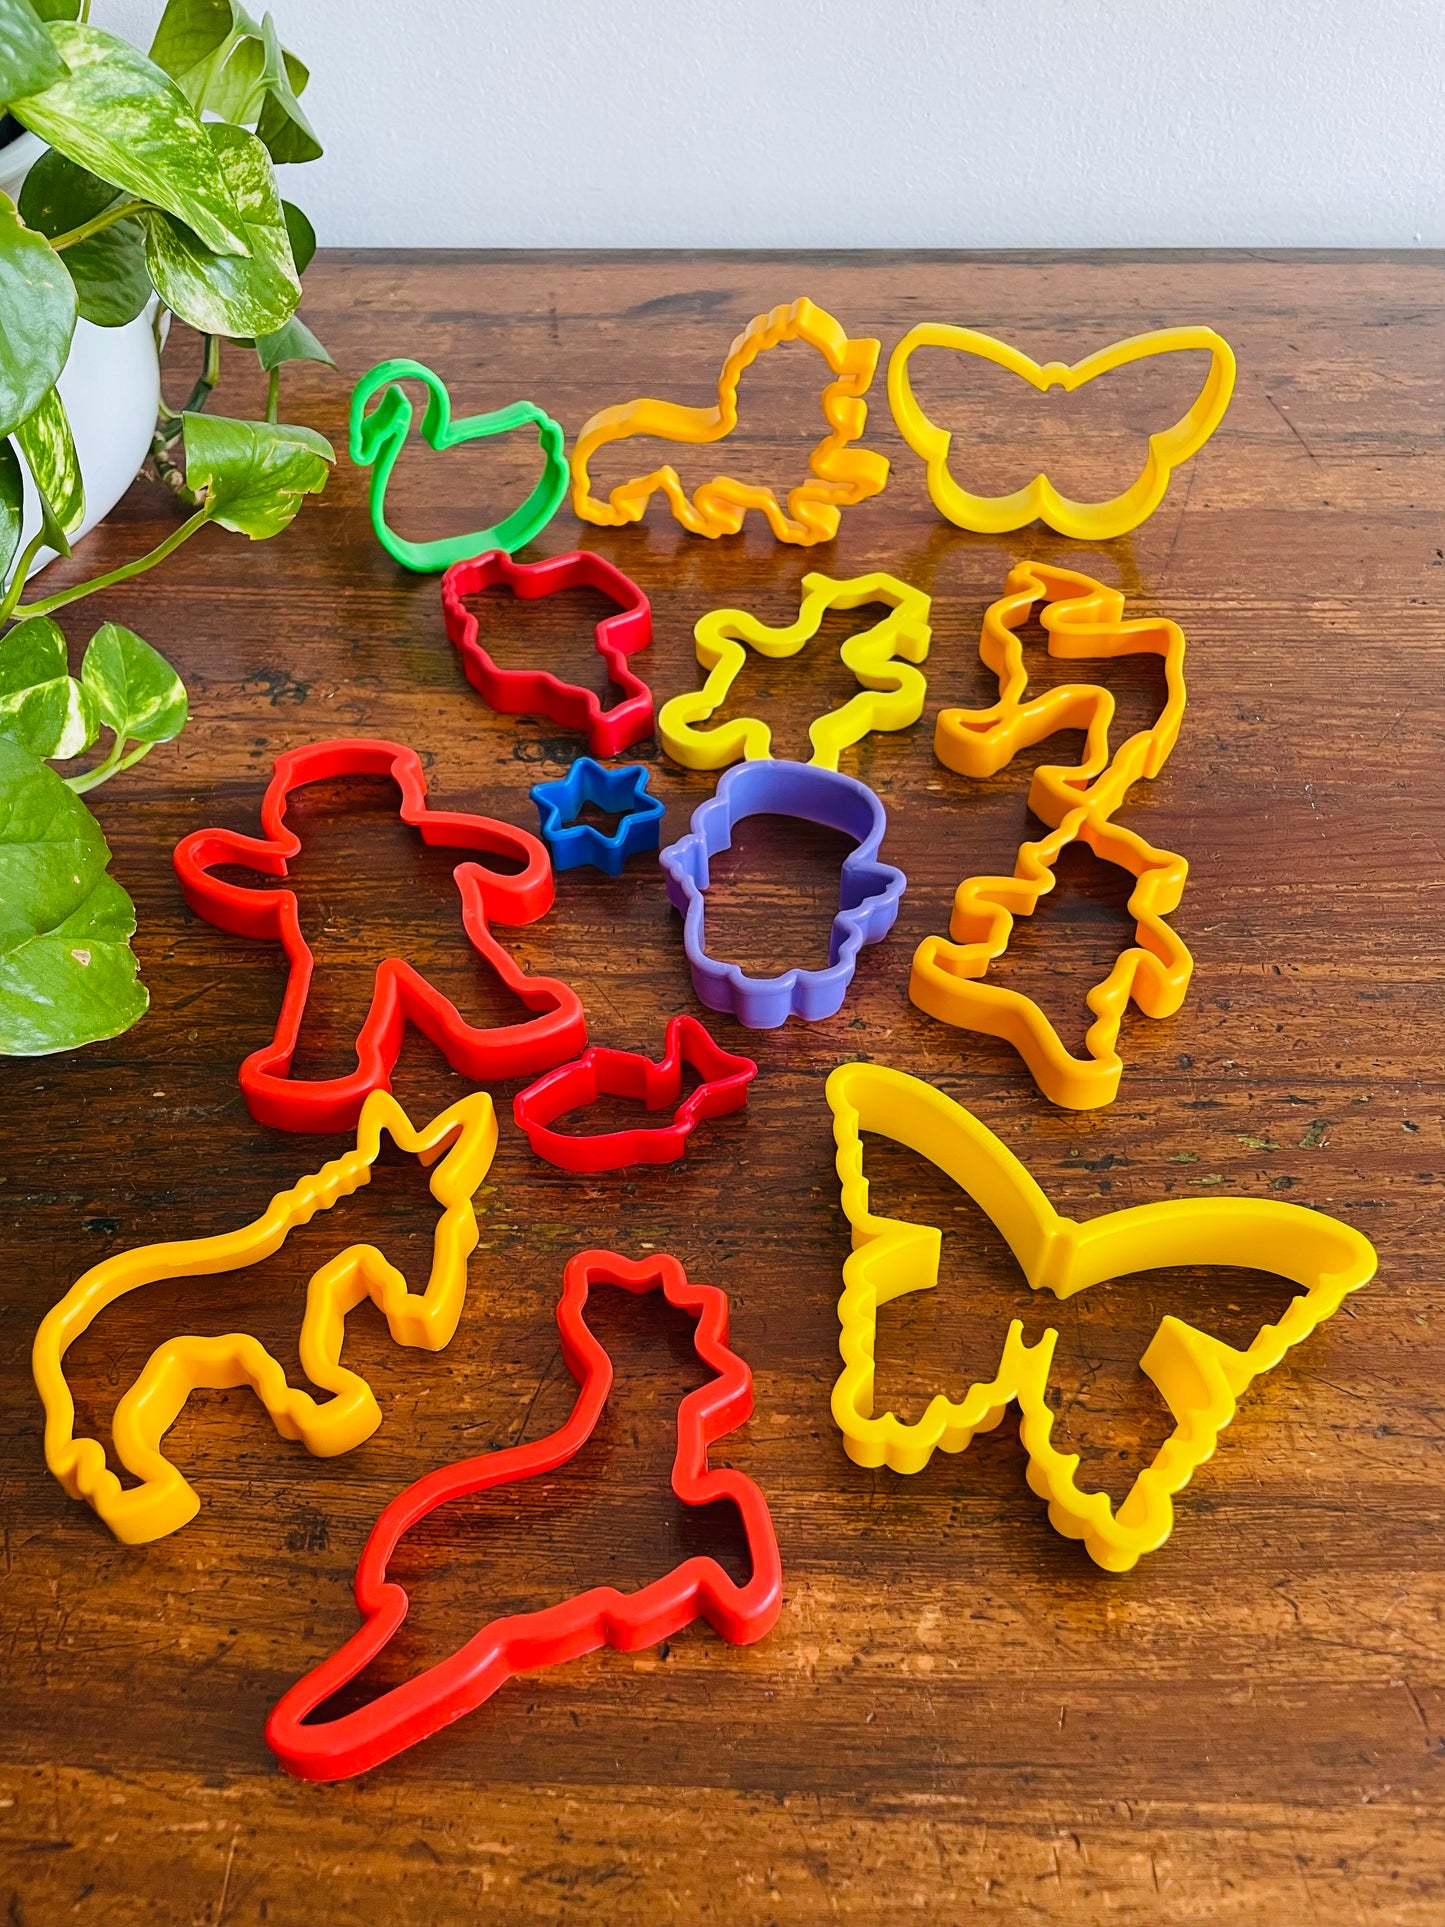 Plastic Cookie Cutter Bundle - 14 Assorted Shapes - Great for Baking or Craft Time!